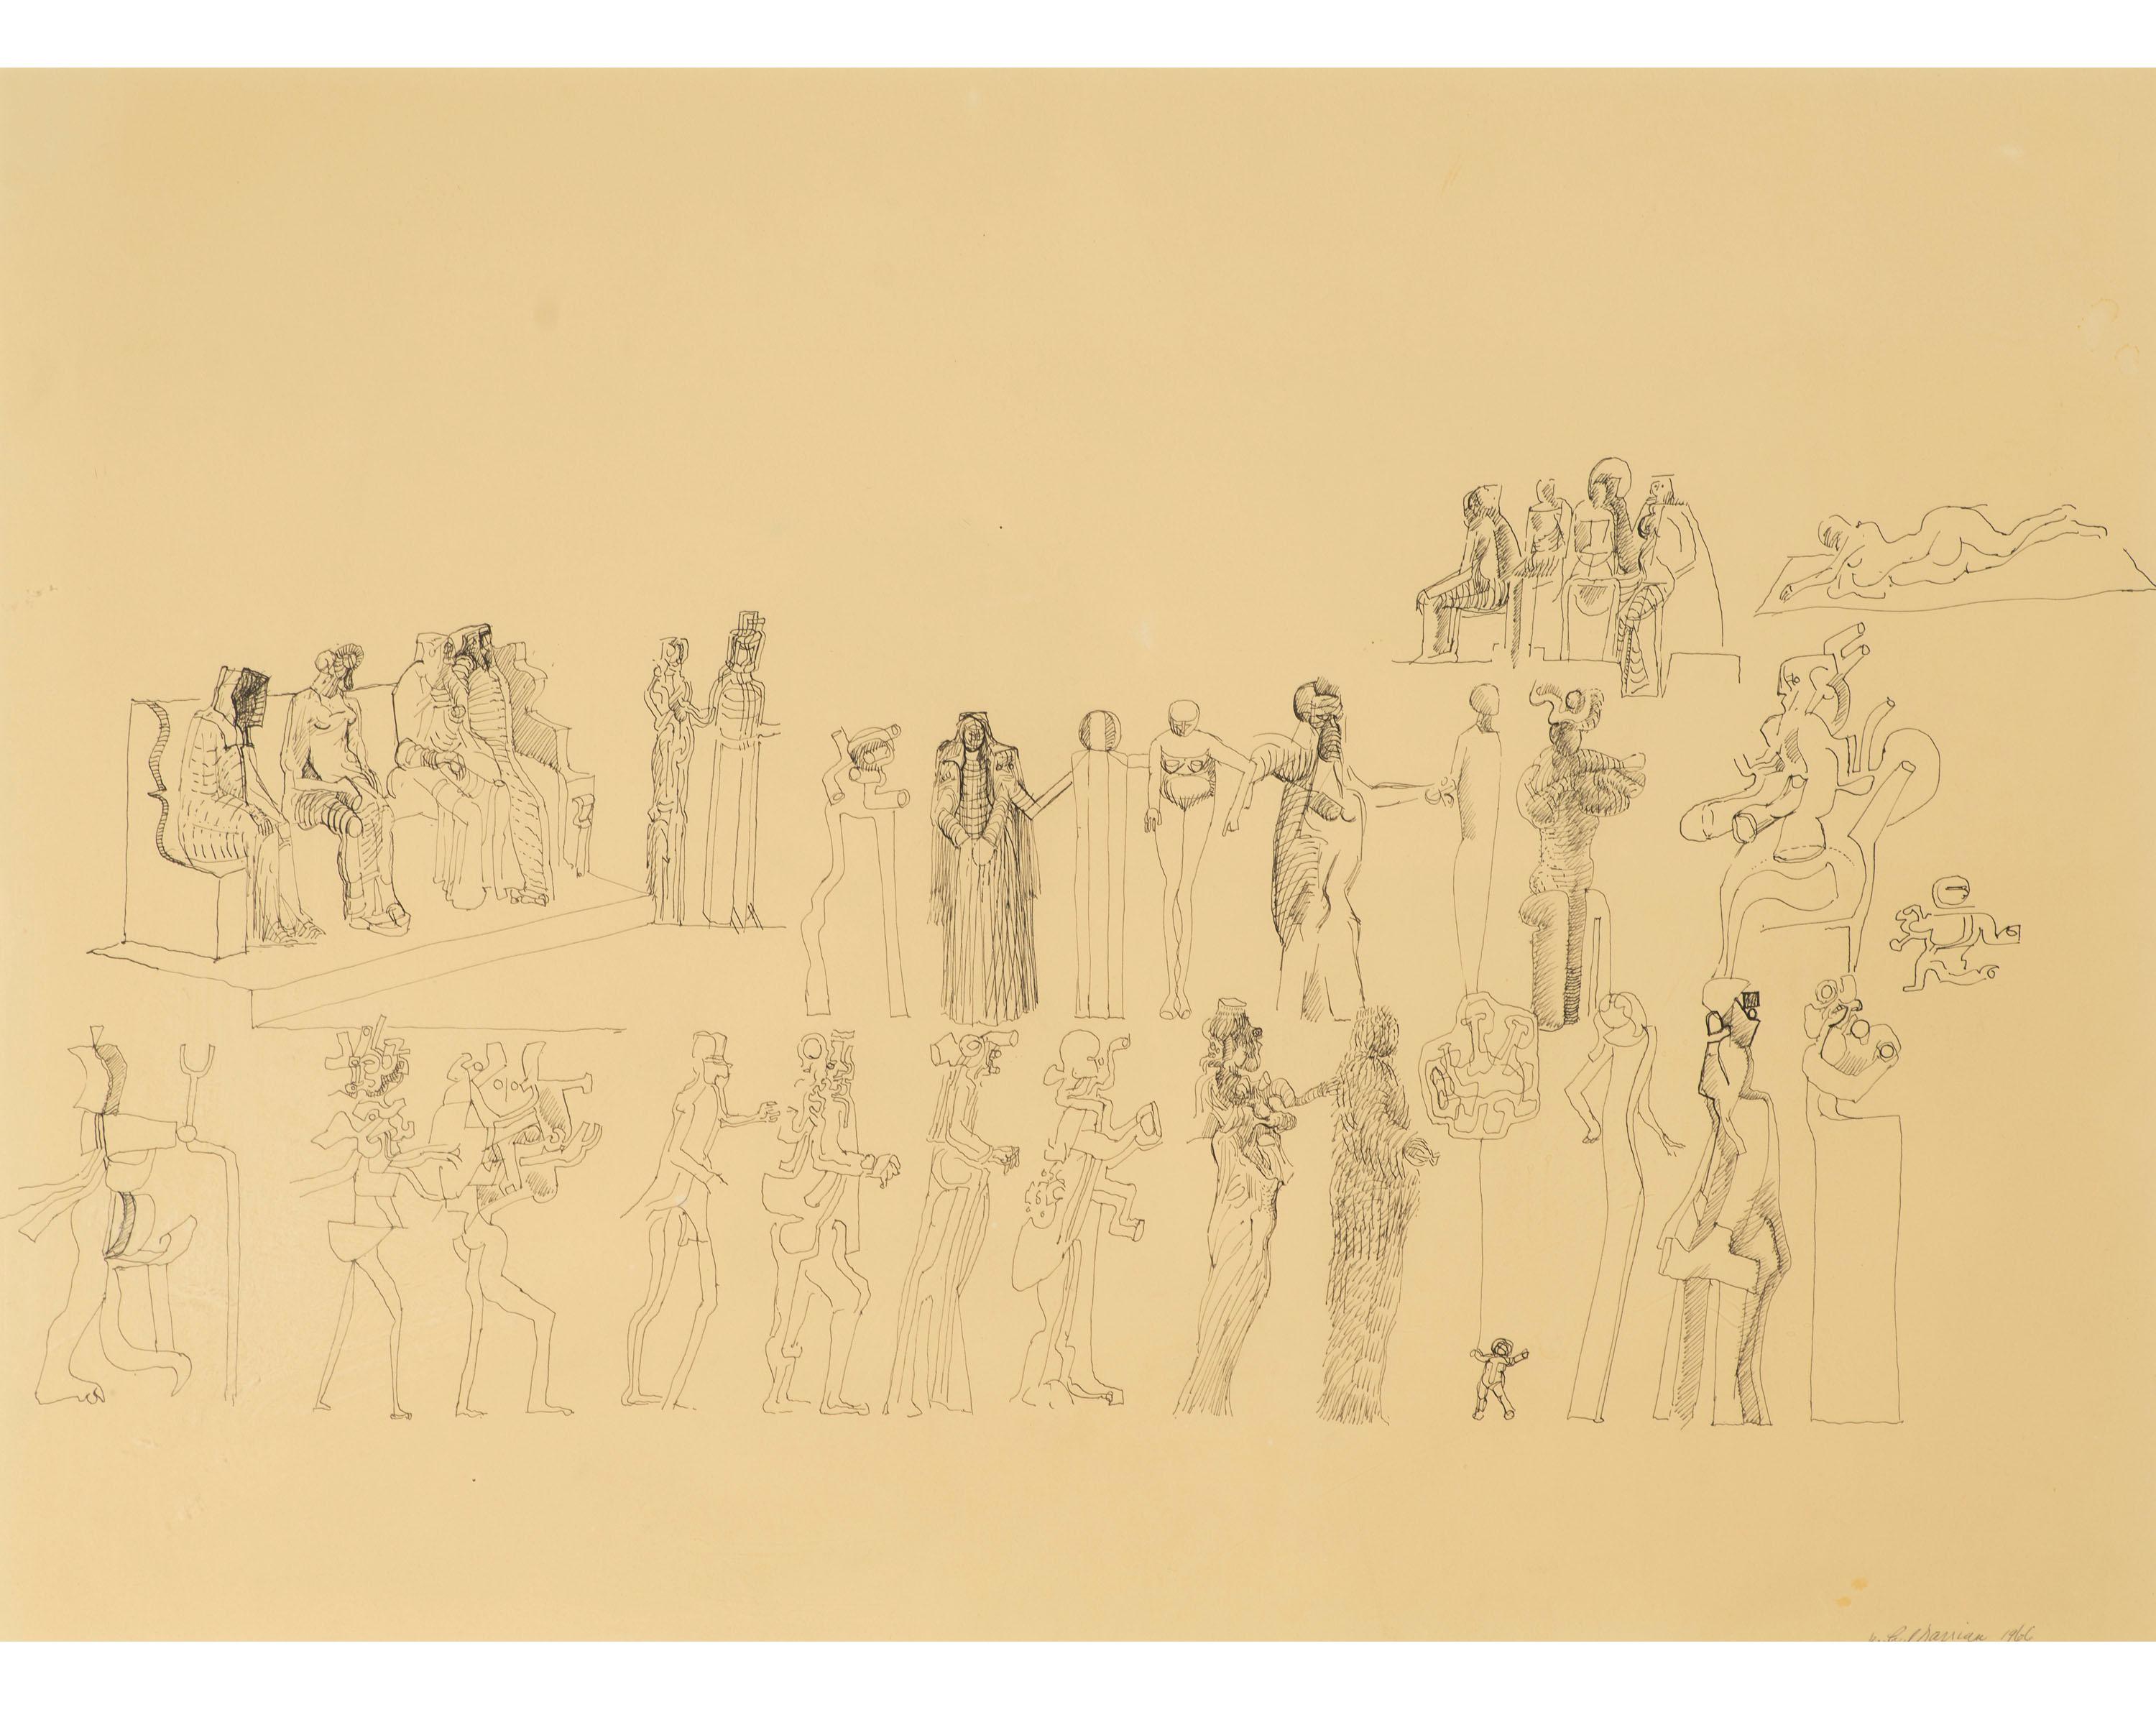 An abstract ink drawing of a group of figures by Jean Paul Darriau (1929-2006). Darriau's drawing on paper depicts a gathering of abstracted, ambiguous figures in varying poses. Some are seated near one another, while others seem to stand orderly in